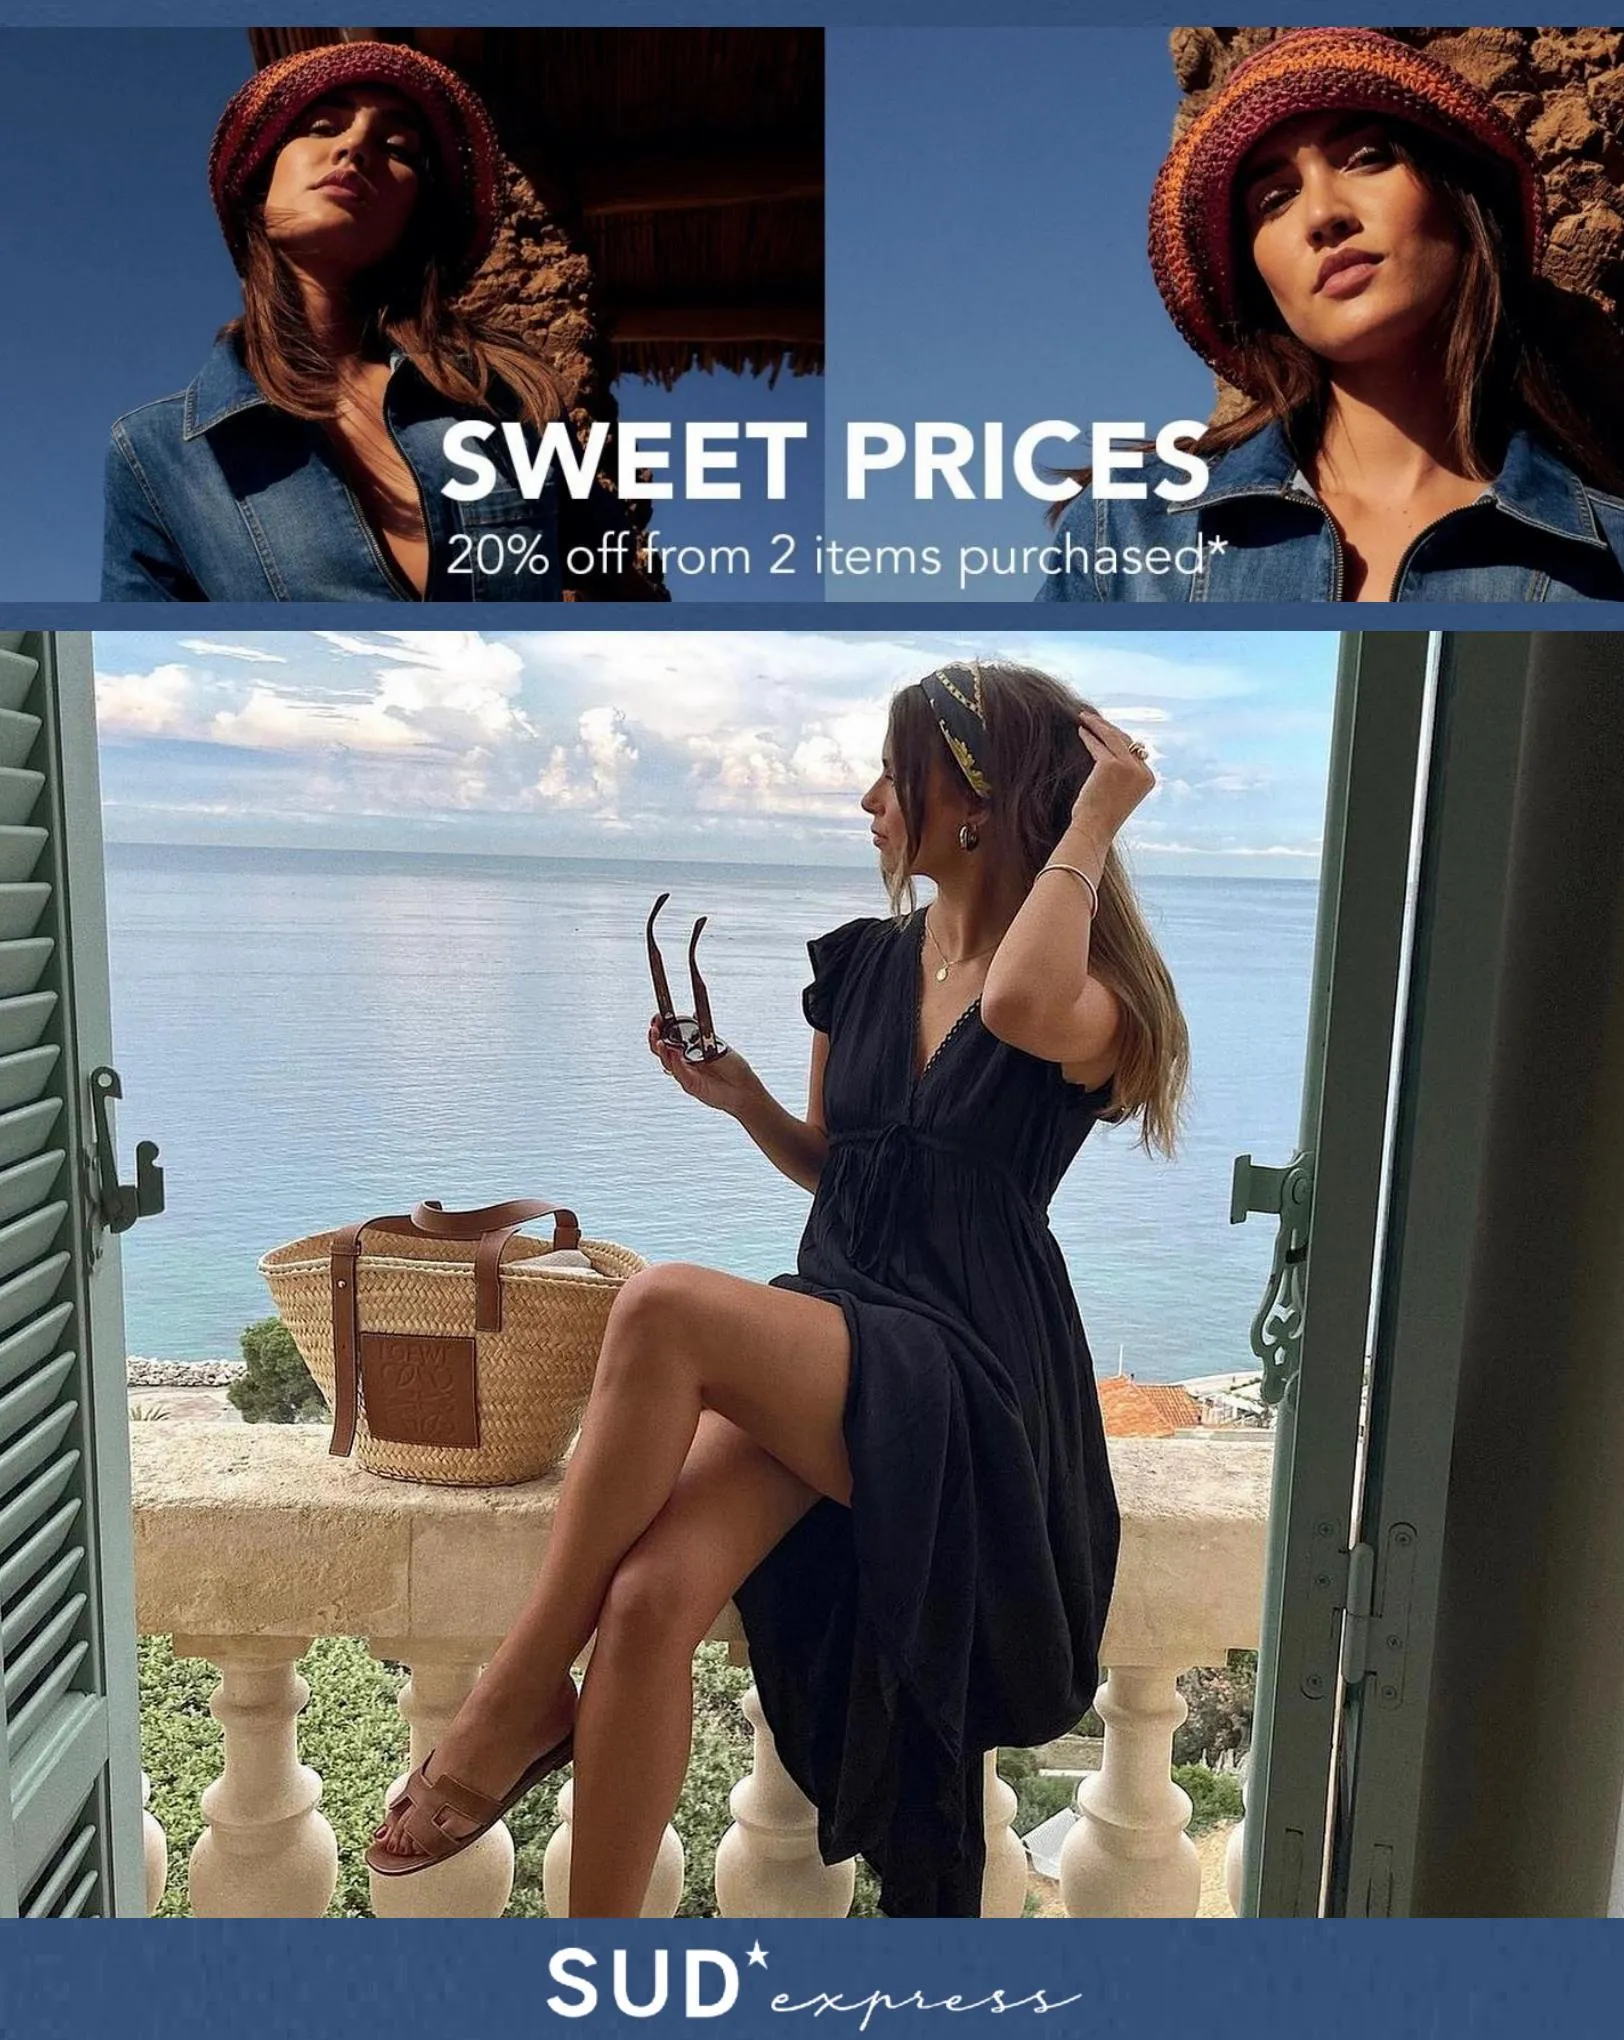 Catalogue Sweet Prices 20% Off from 2 Pieces*, page 00001